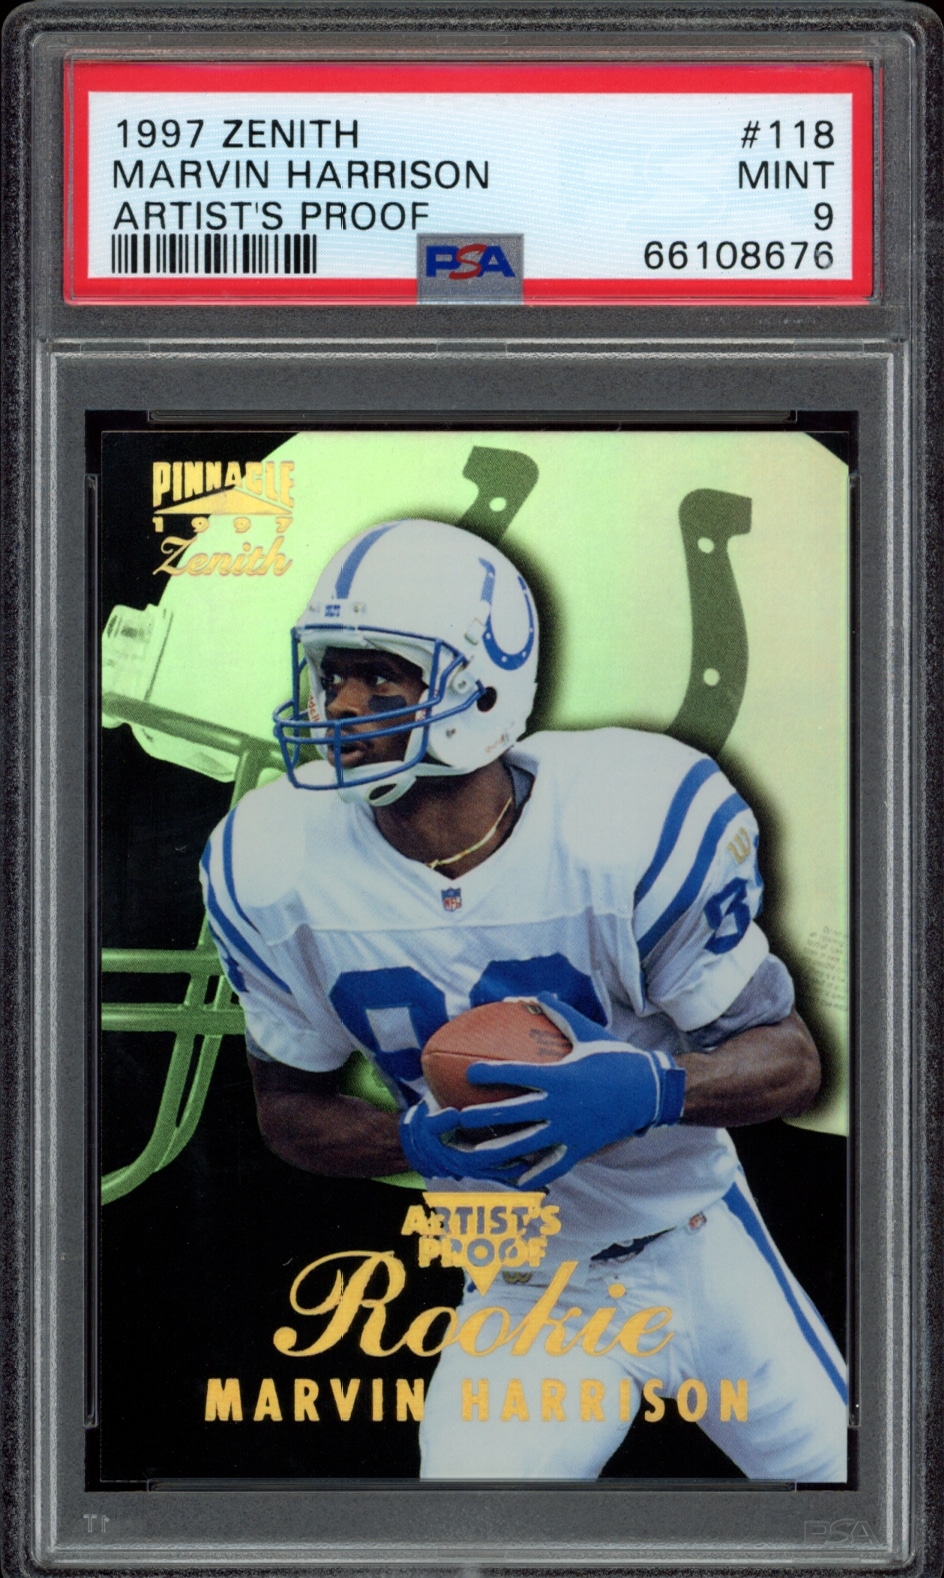 Graded PSA 9 1997 Pinnacle Zenith Artists Proof card featuring football player Marvin Harrison.